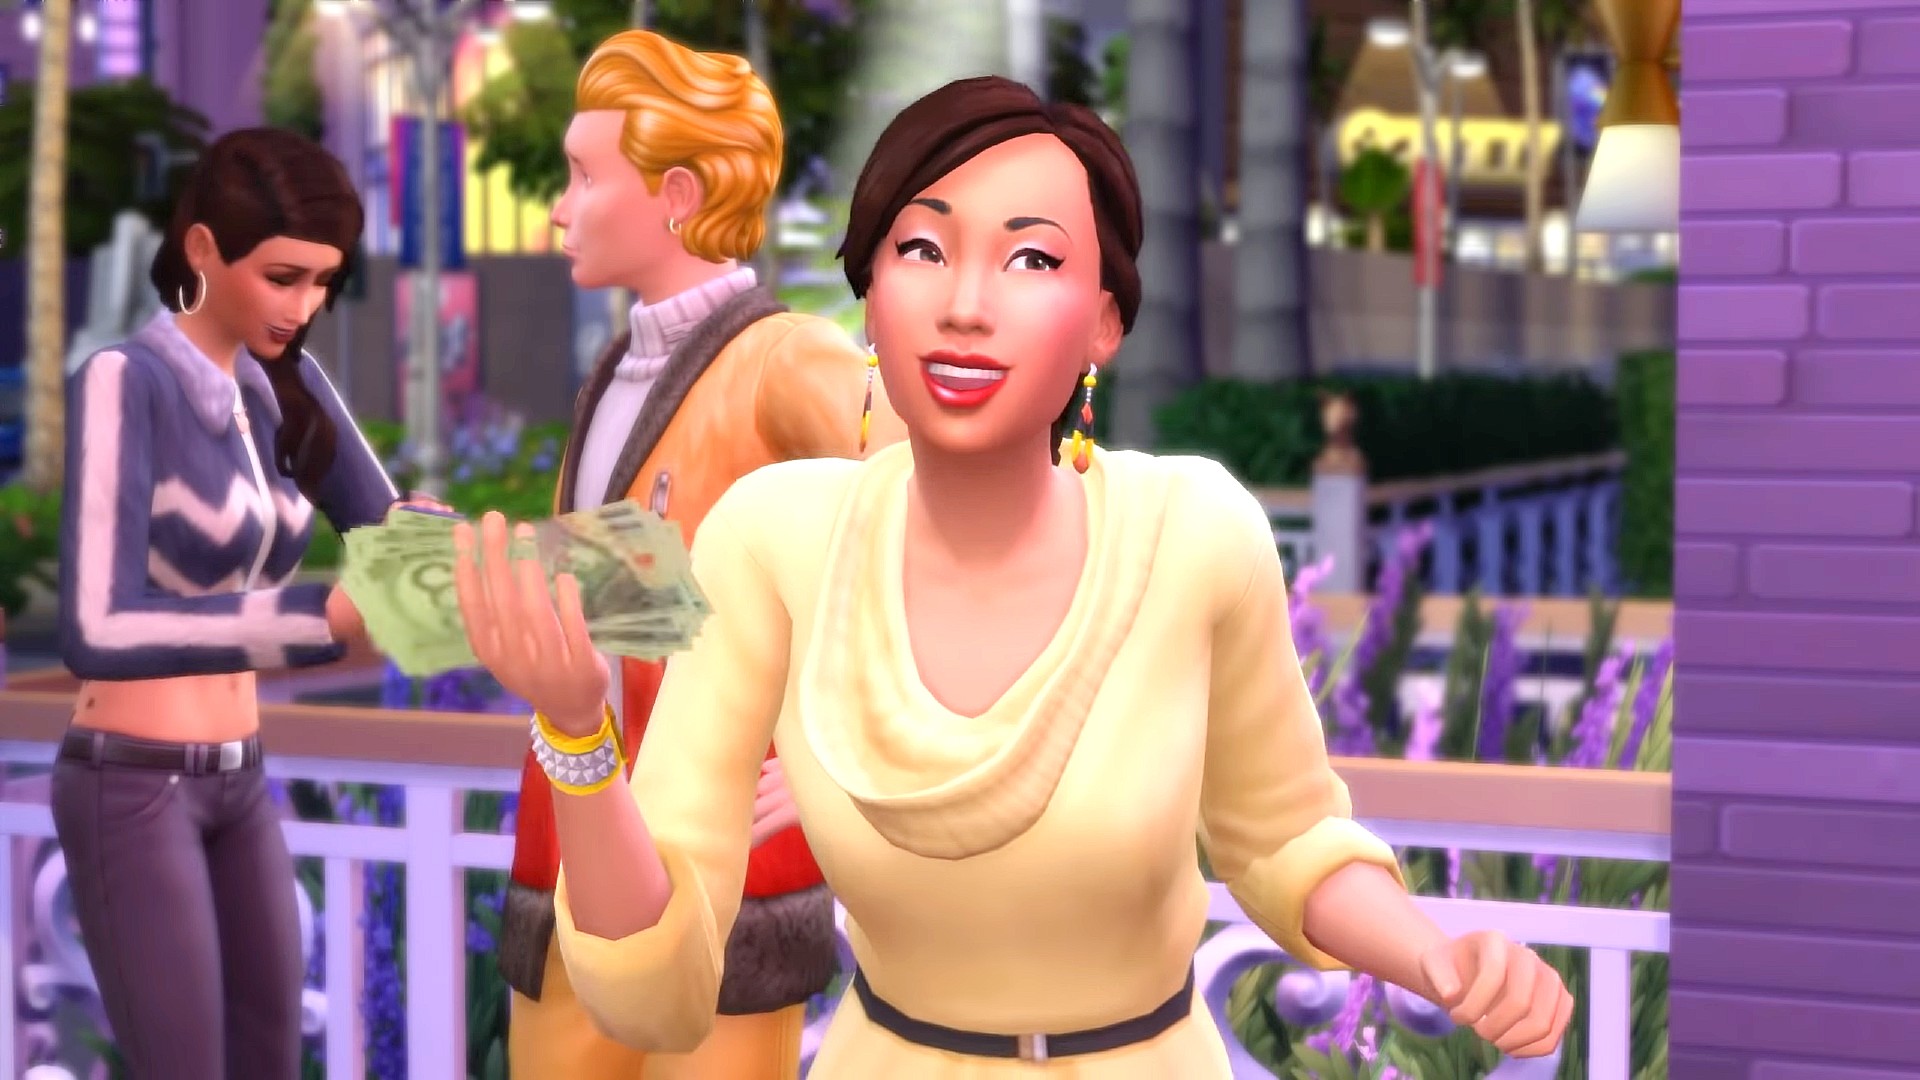 The Sims 5 wishlist: when is Sims 5 coming out?